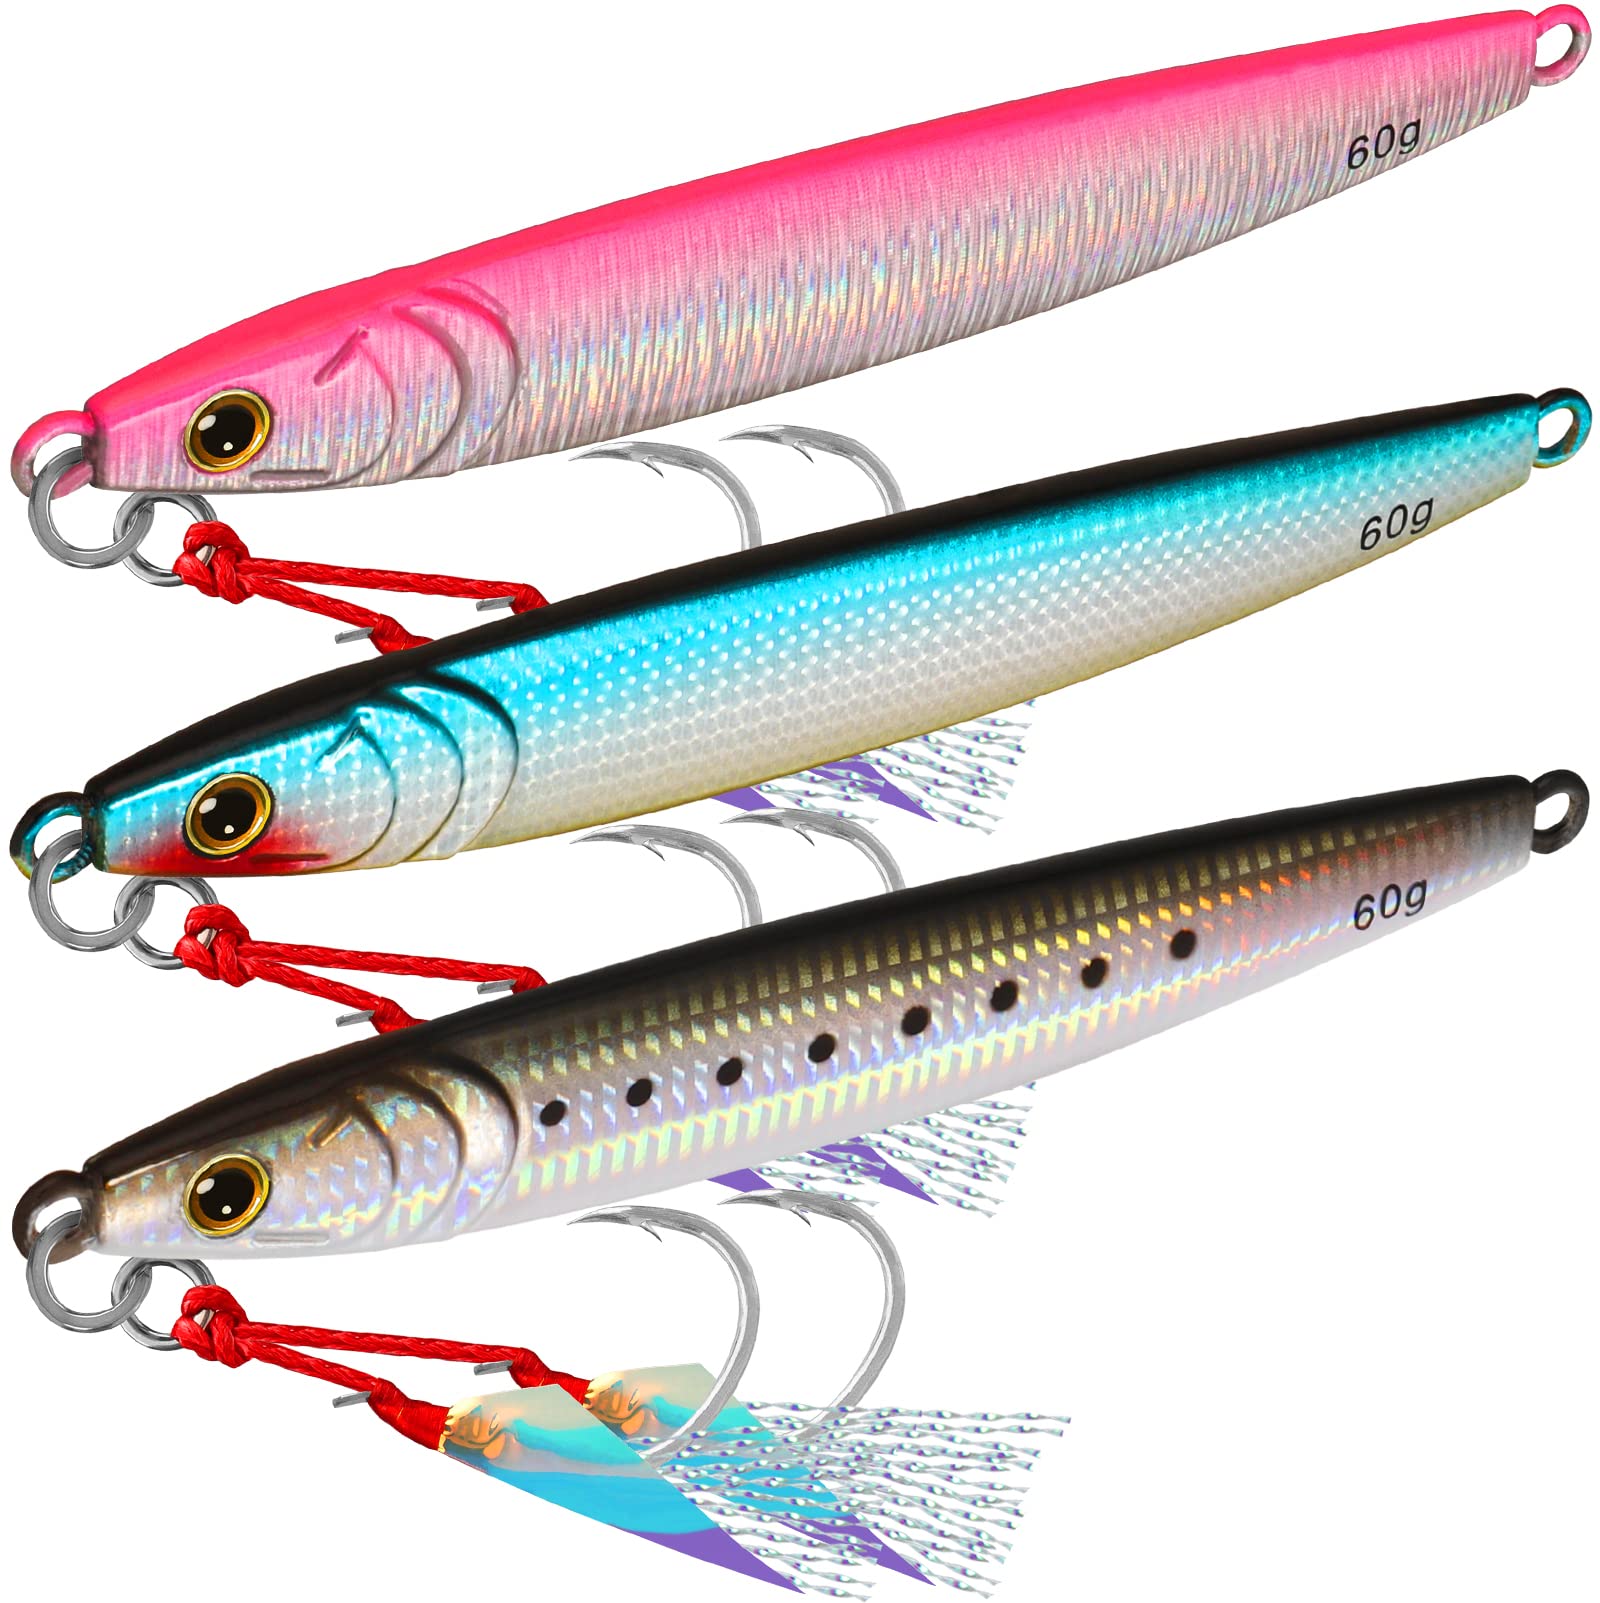 Truscend Topwater Fishing Lures with BKK Hooks - Malaysia